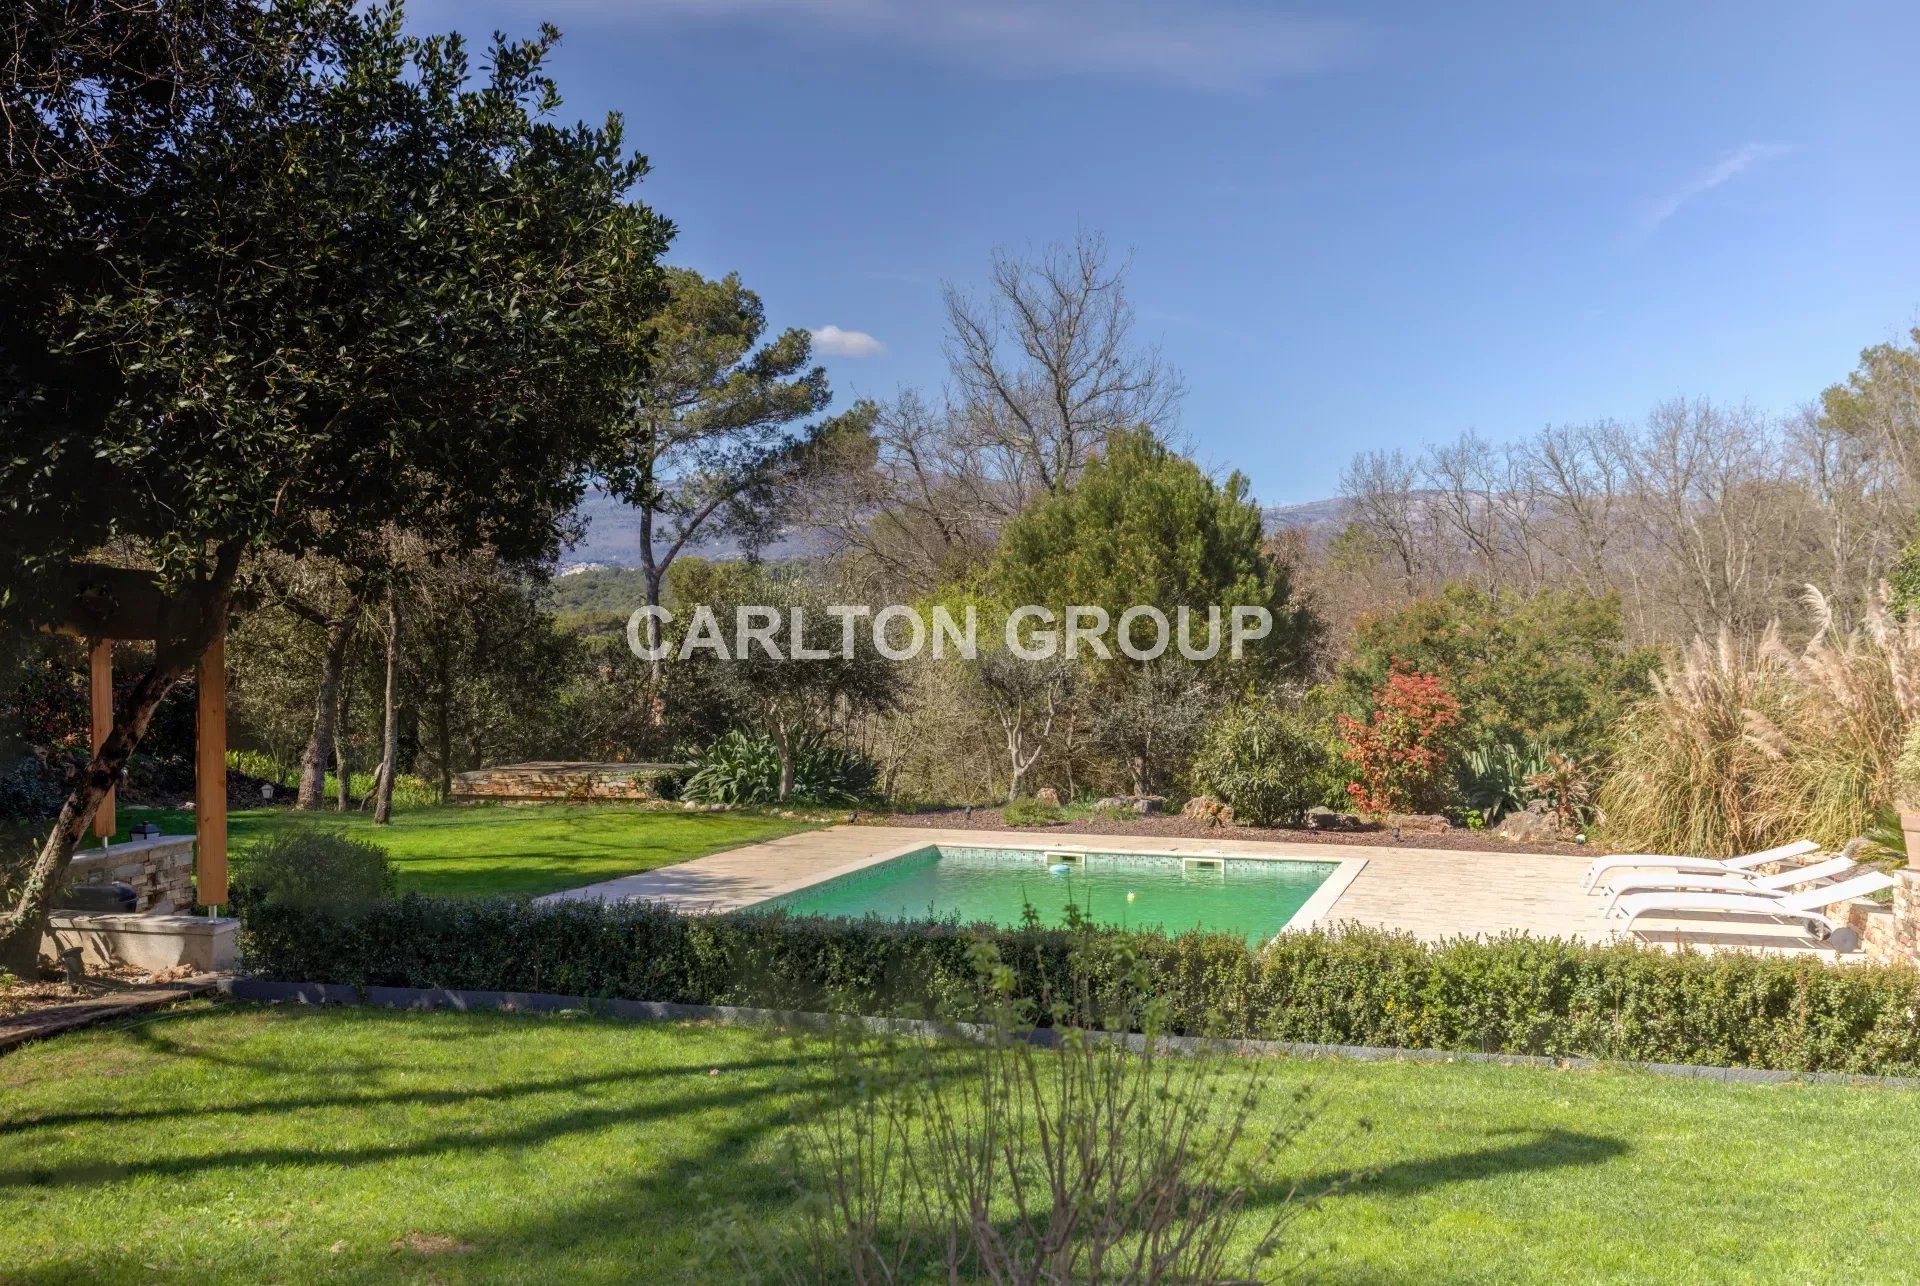 Sole Agent - Modern provencal style villa with countryside views